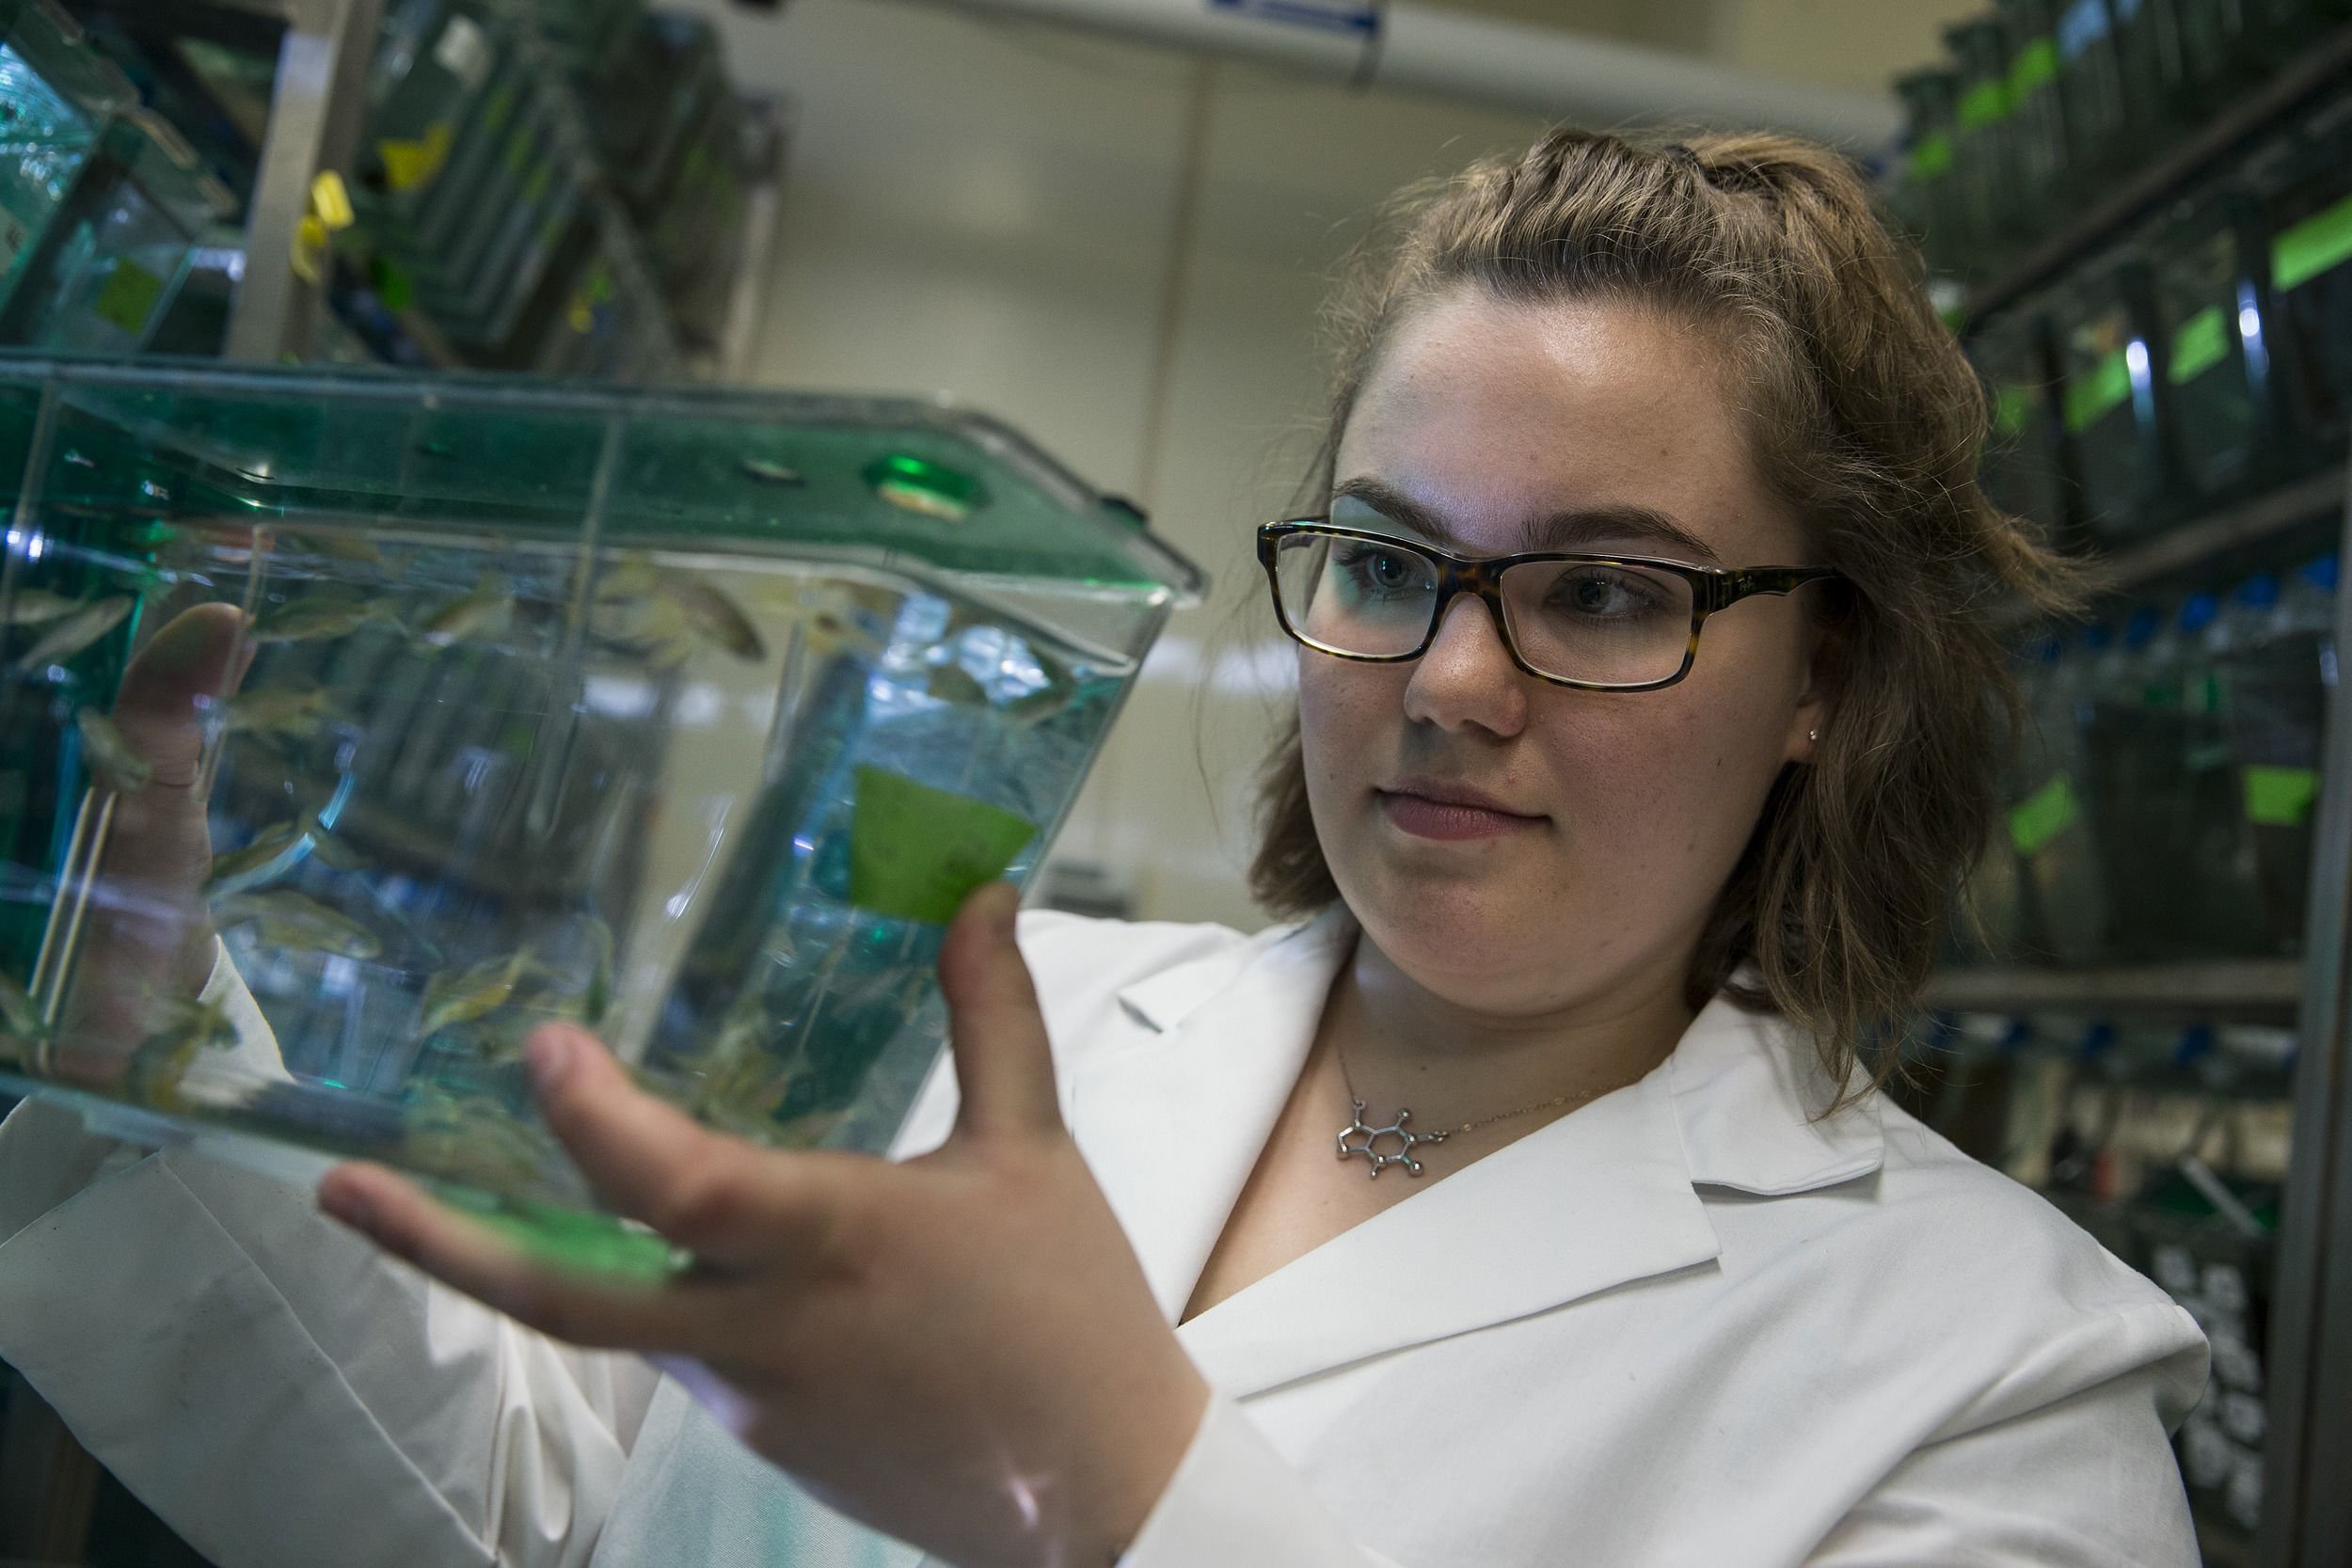 A student in a white lab coat examines a small fish tank